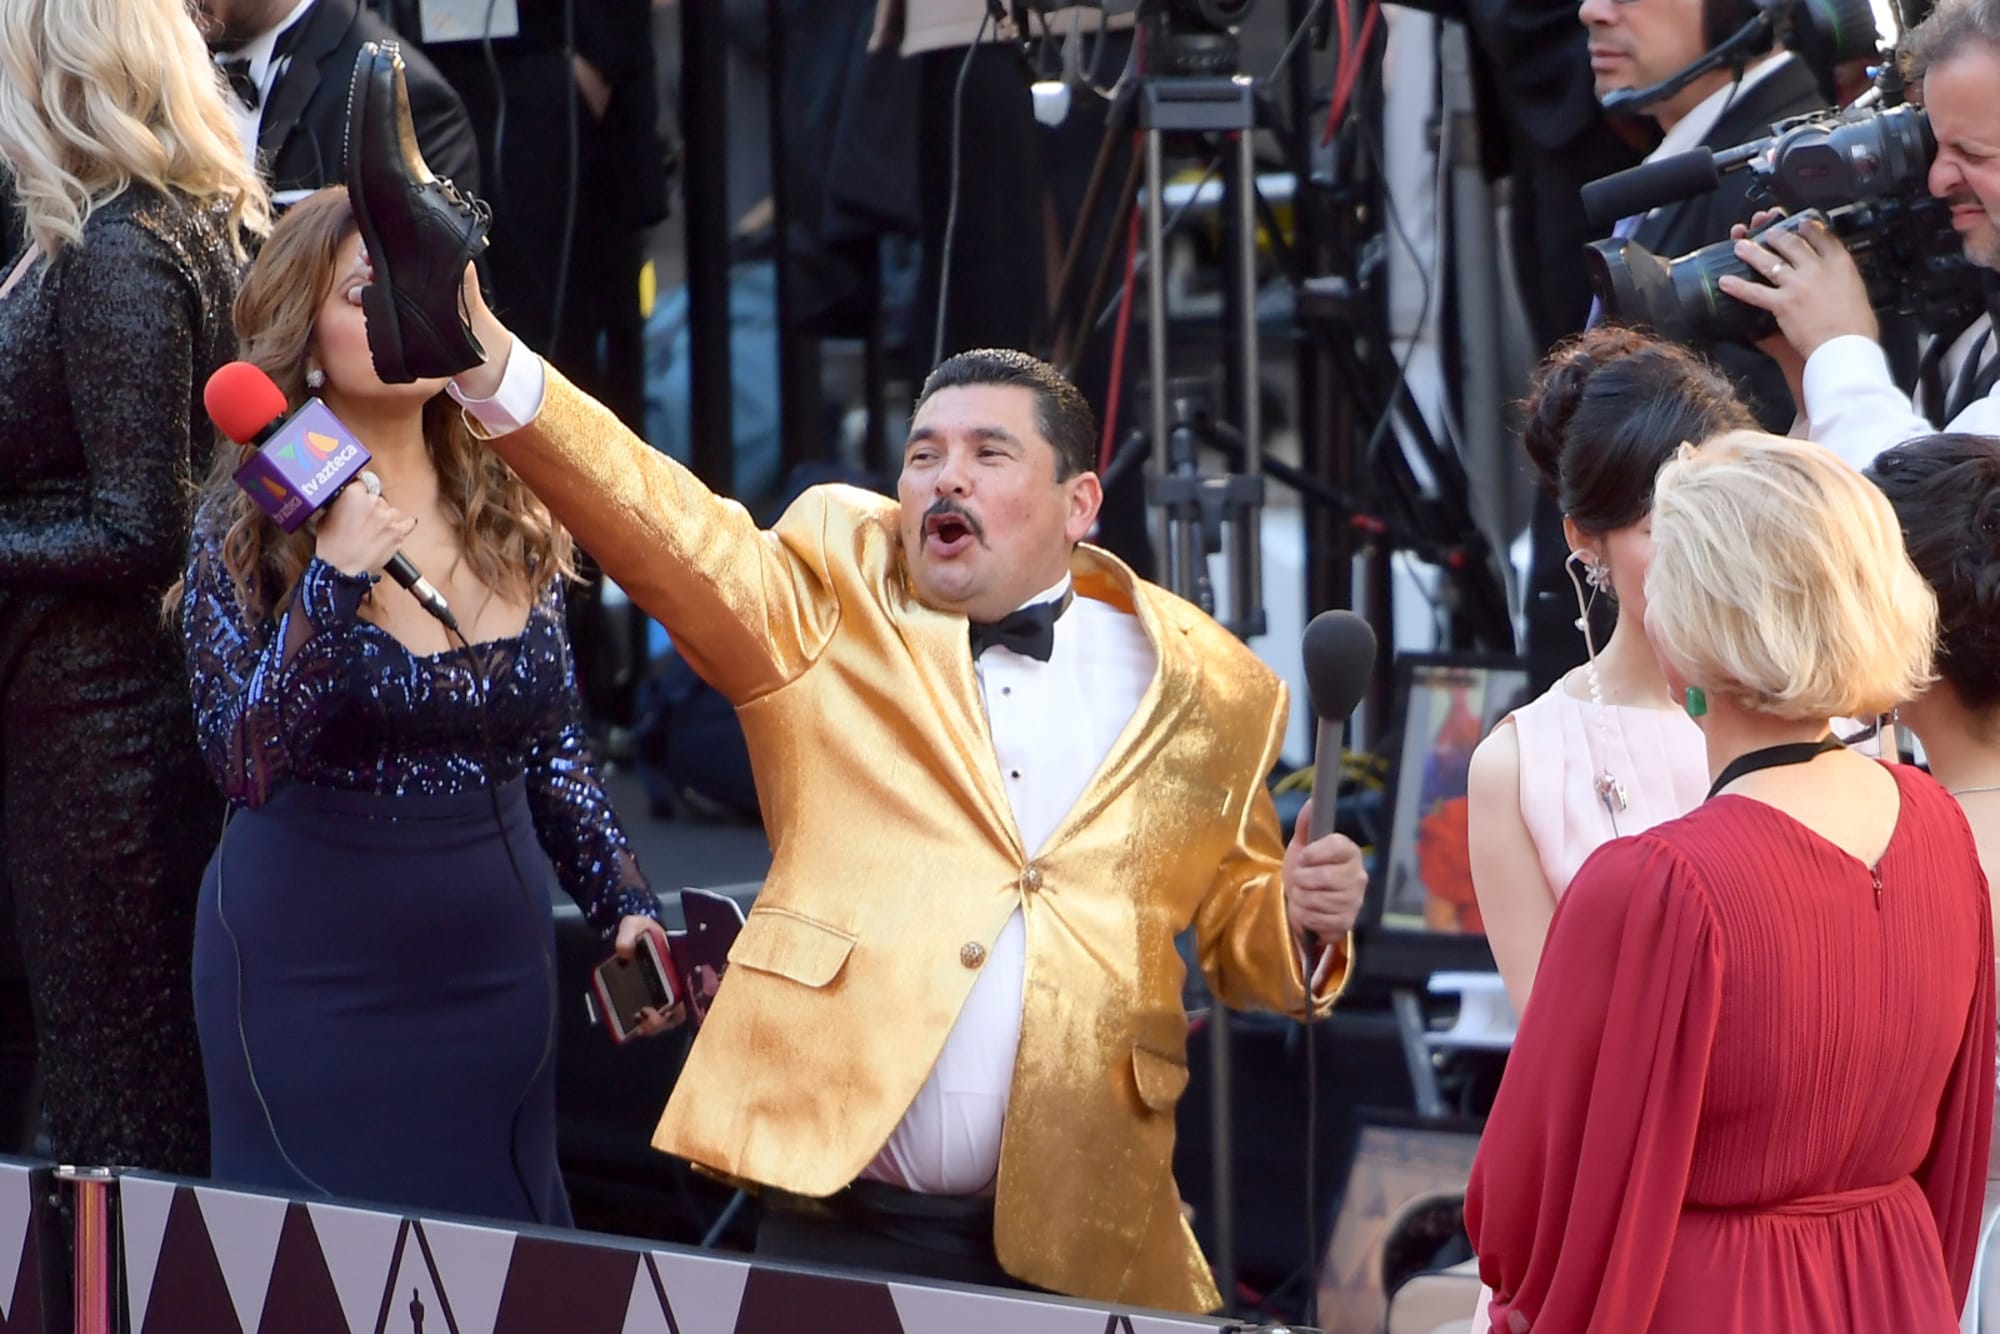 Jimmy Kimmel Live's Guillermo returned to the Oscars with more tequilla